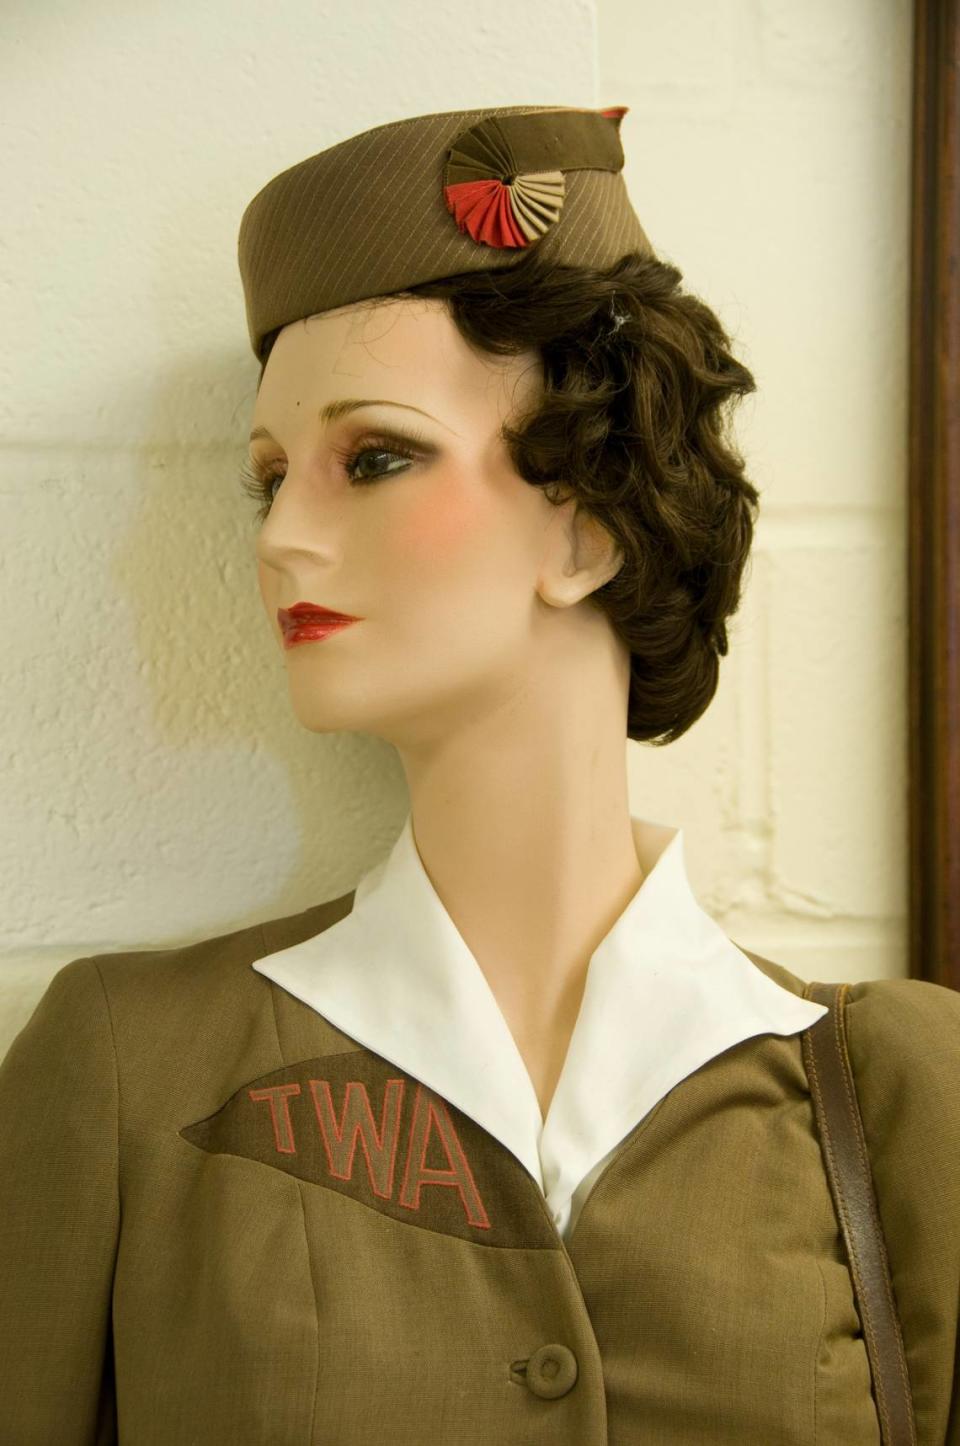 A scene from the museum in 2009: a mannequin in an old TWA hostess outfit.